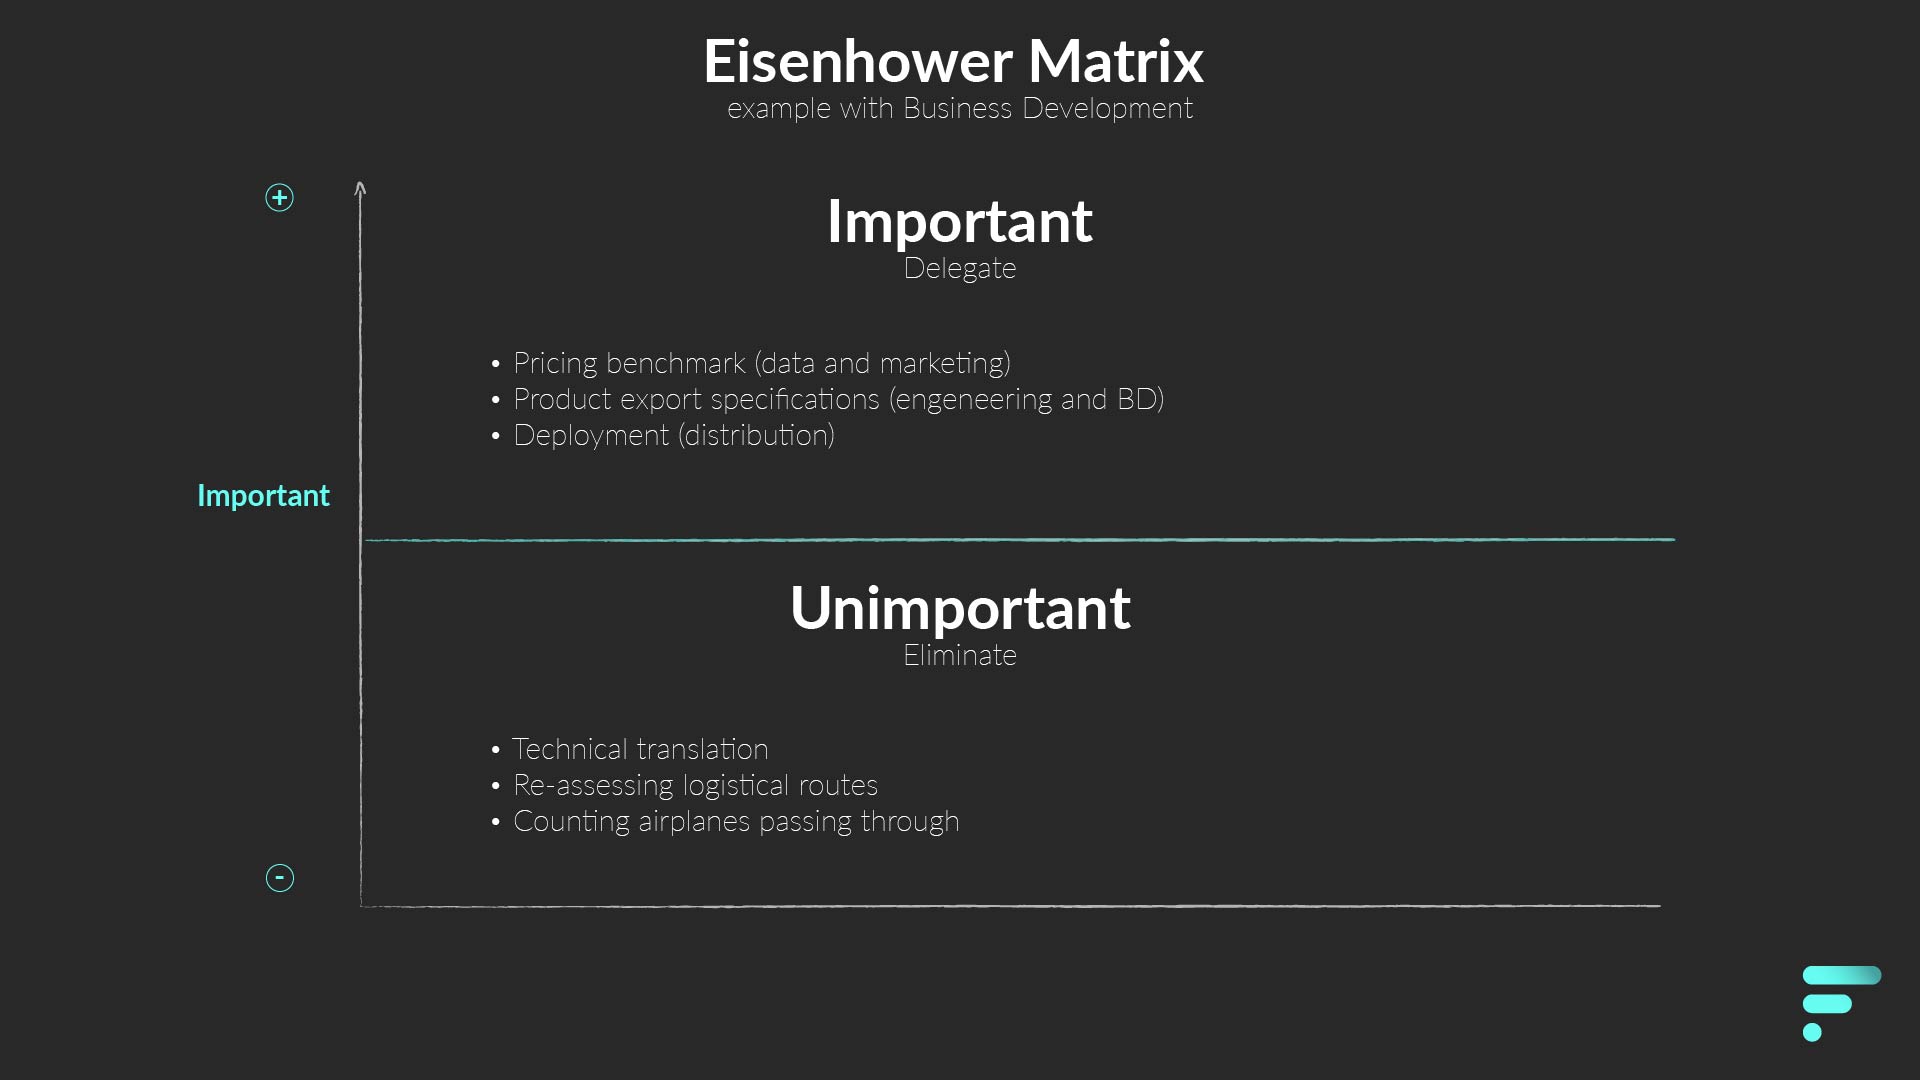 How to Use the Eisenhower Matrix in Business Development